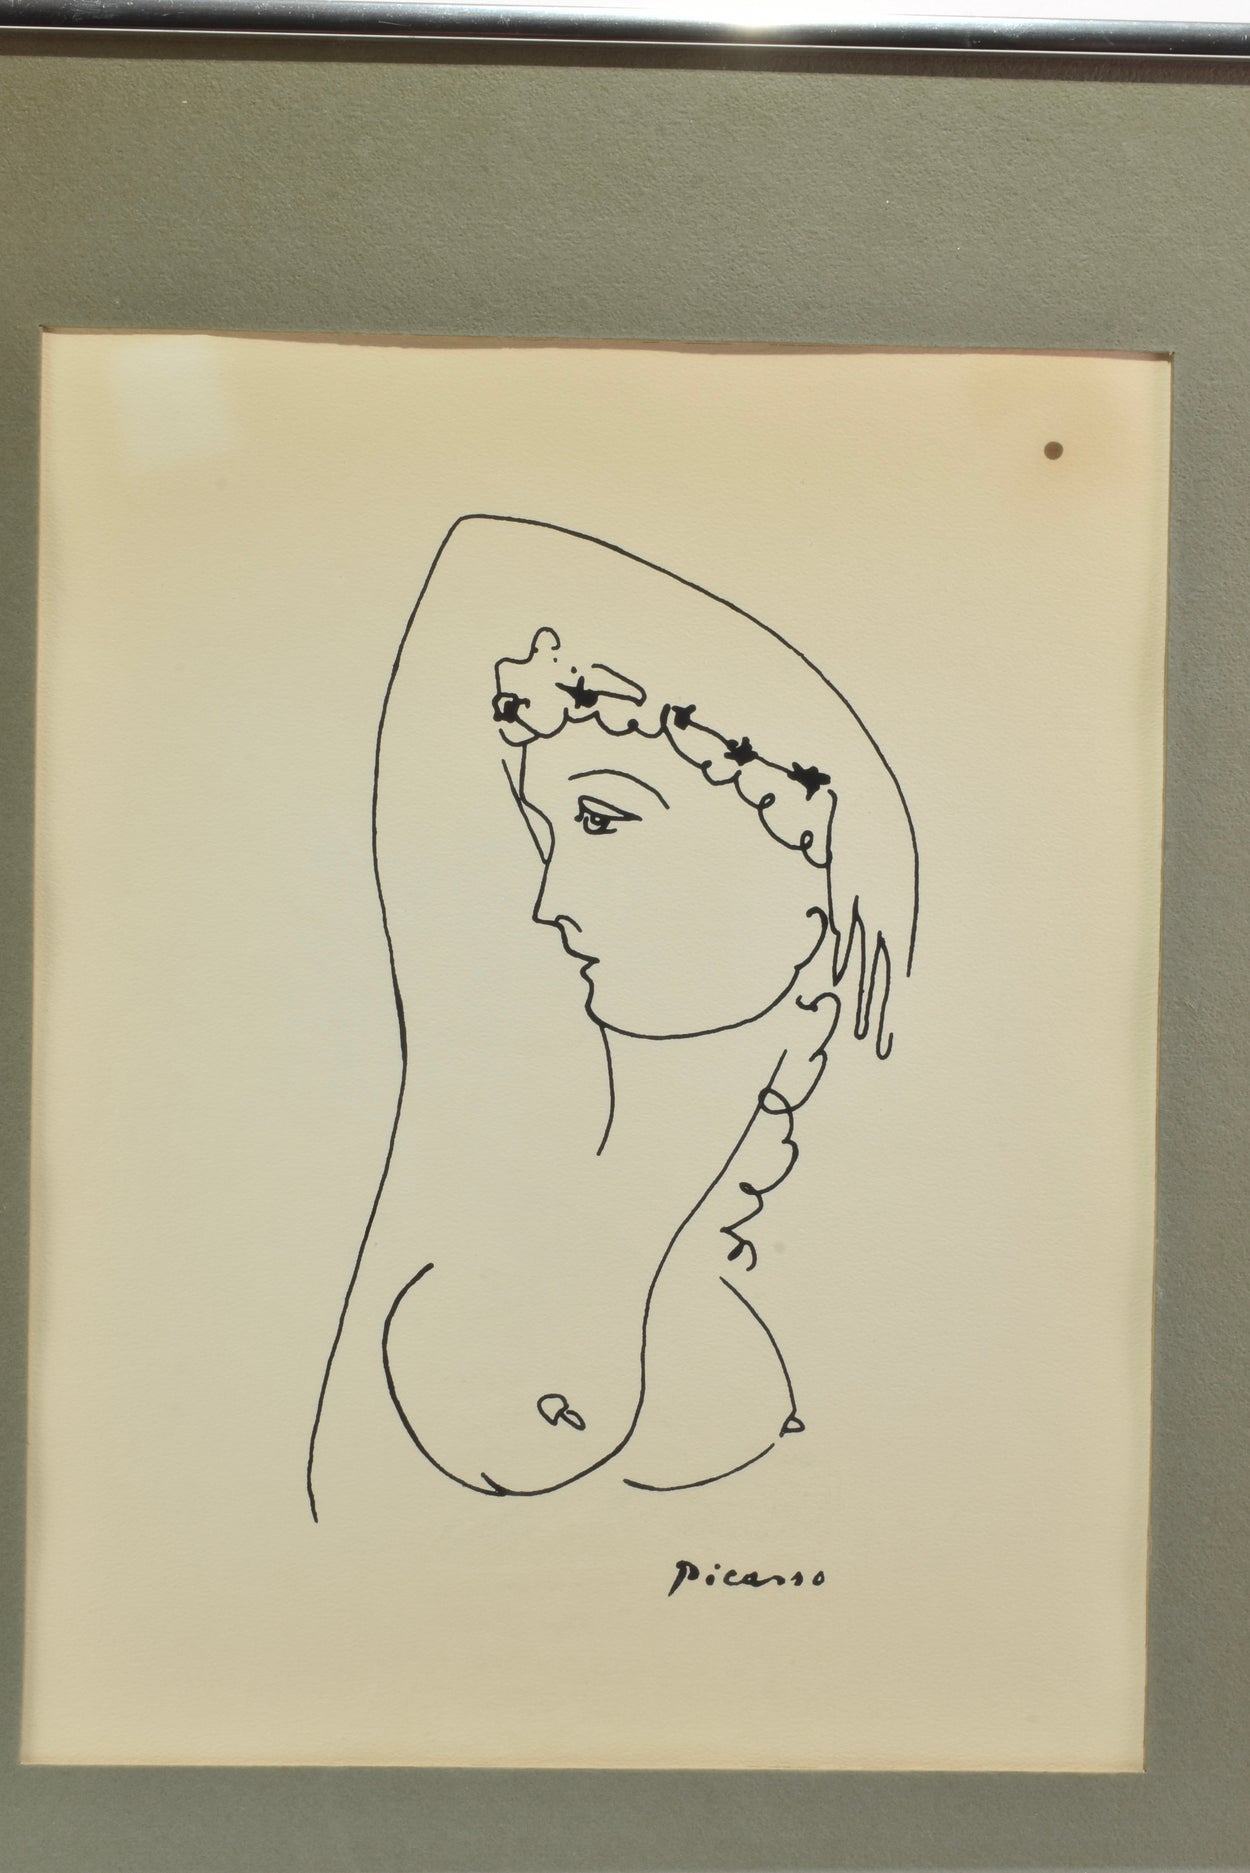 Picasso Lithograph, Framed